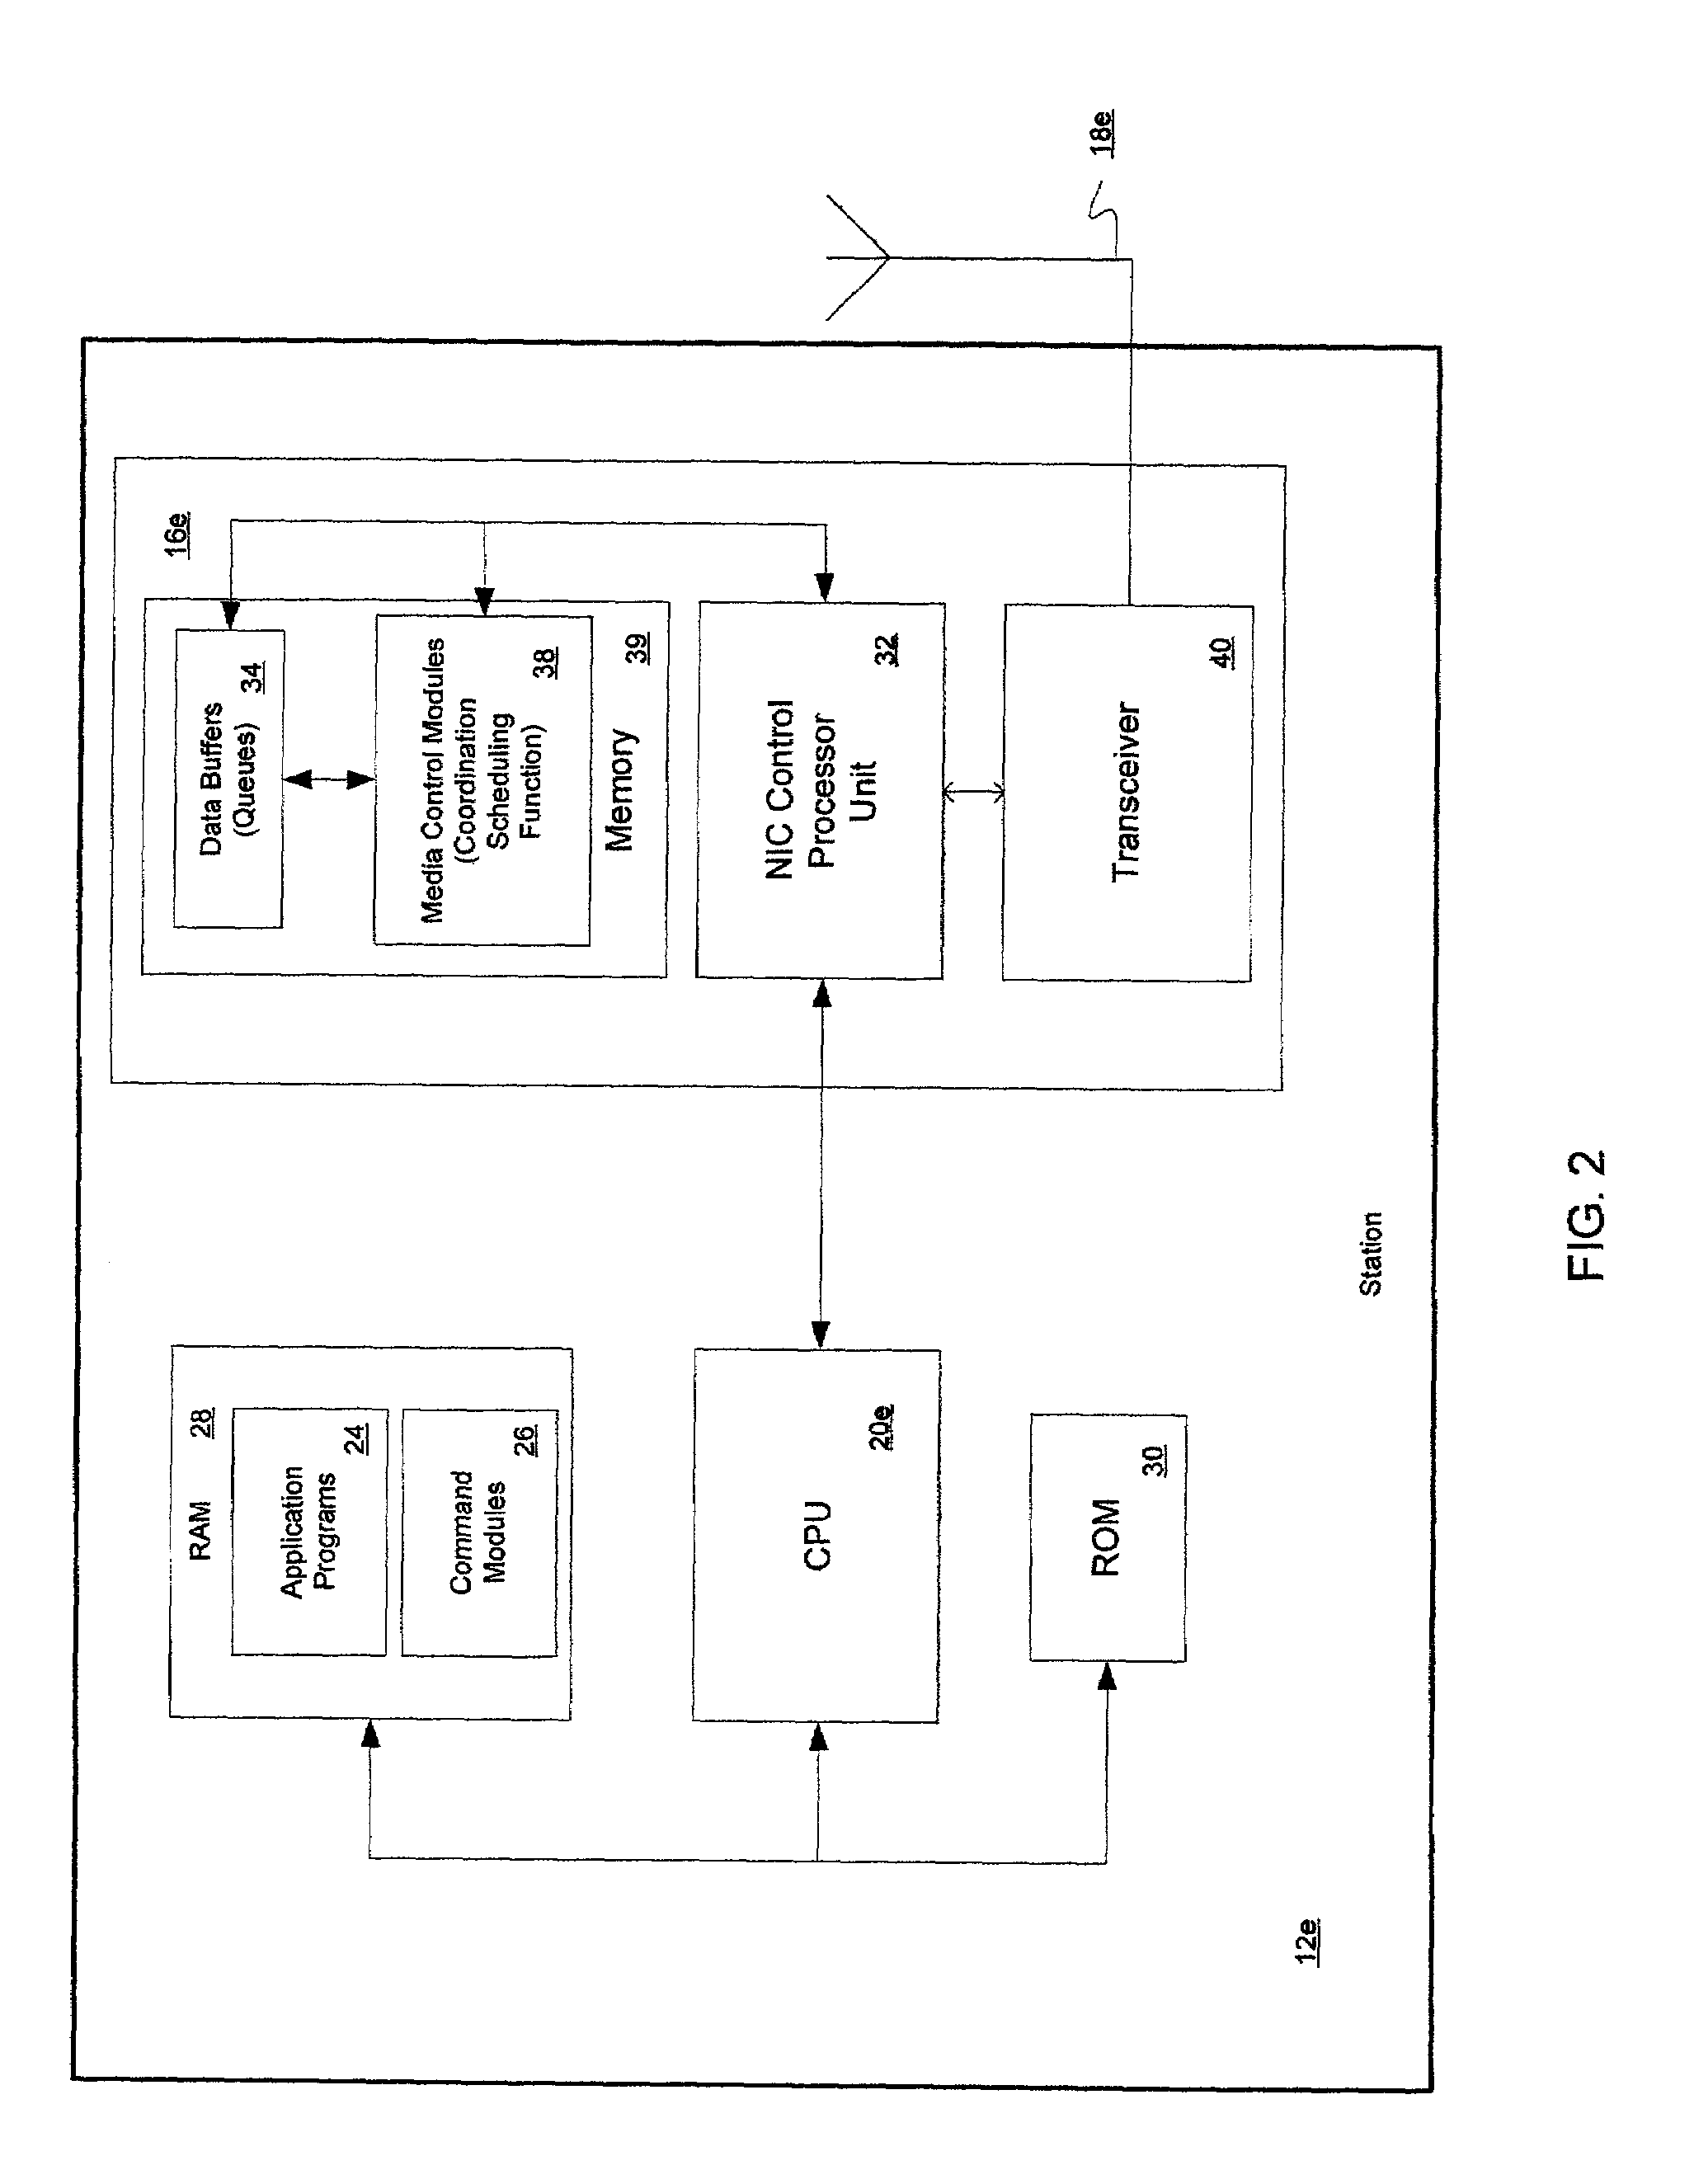 System and method for ordering data messages having differing levels of priority for transmission over a shared communication channel